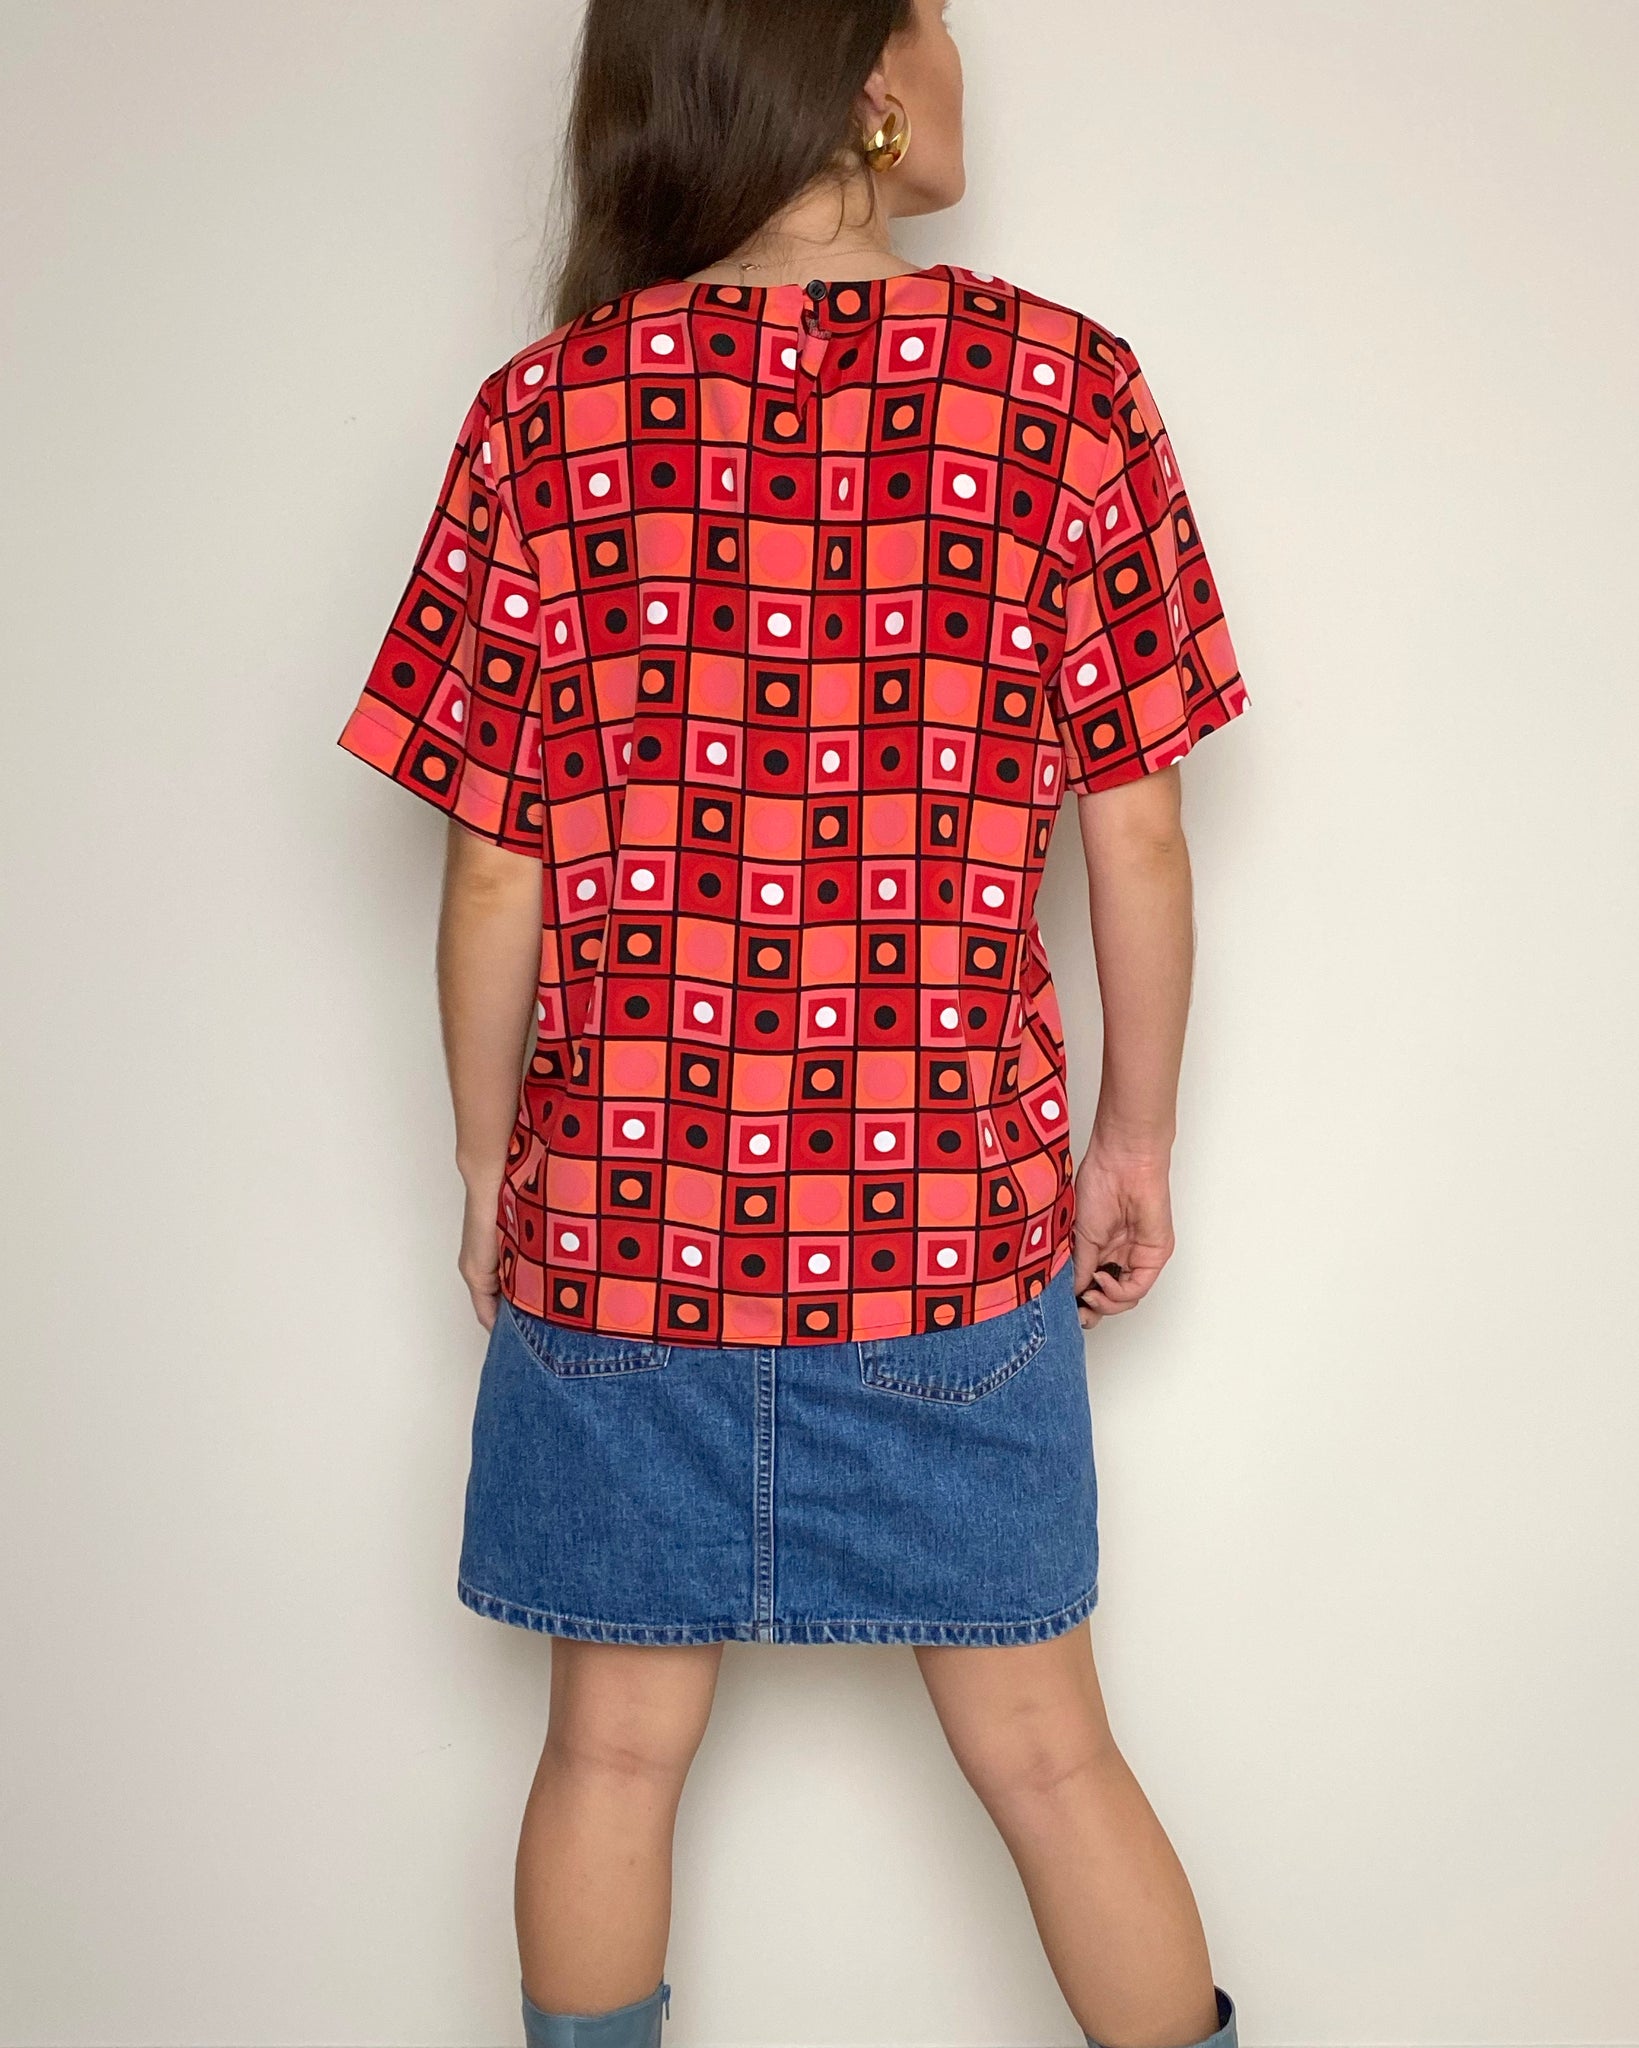 90s Square Blouse (fits S/M)